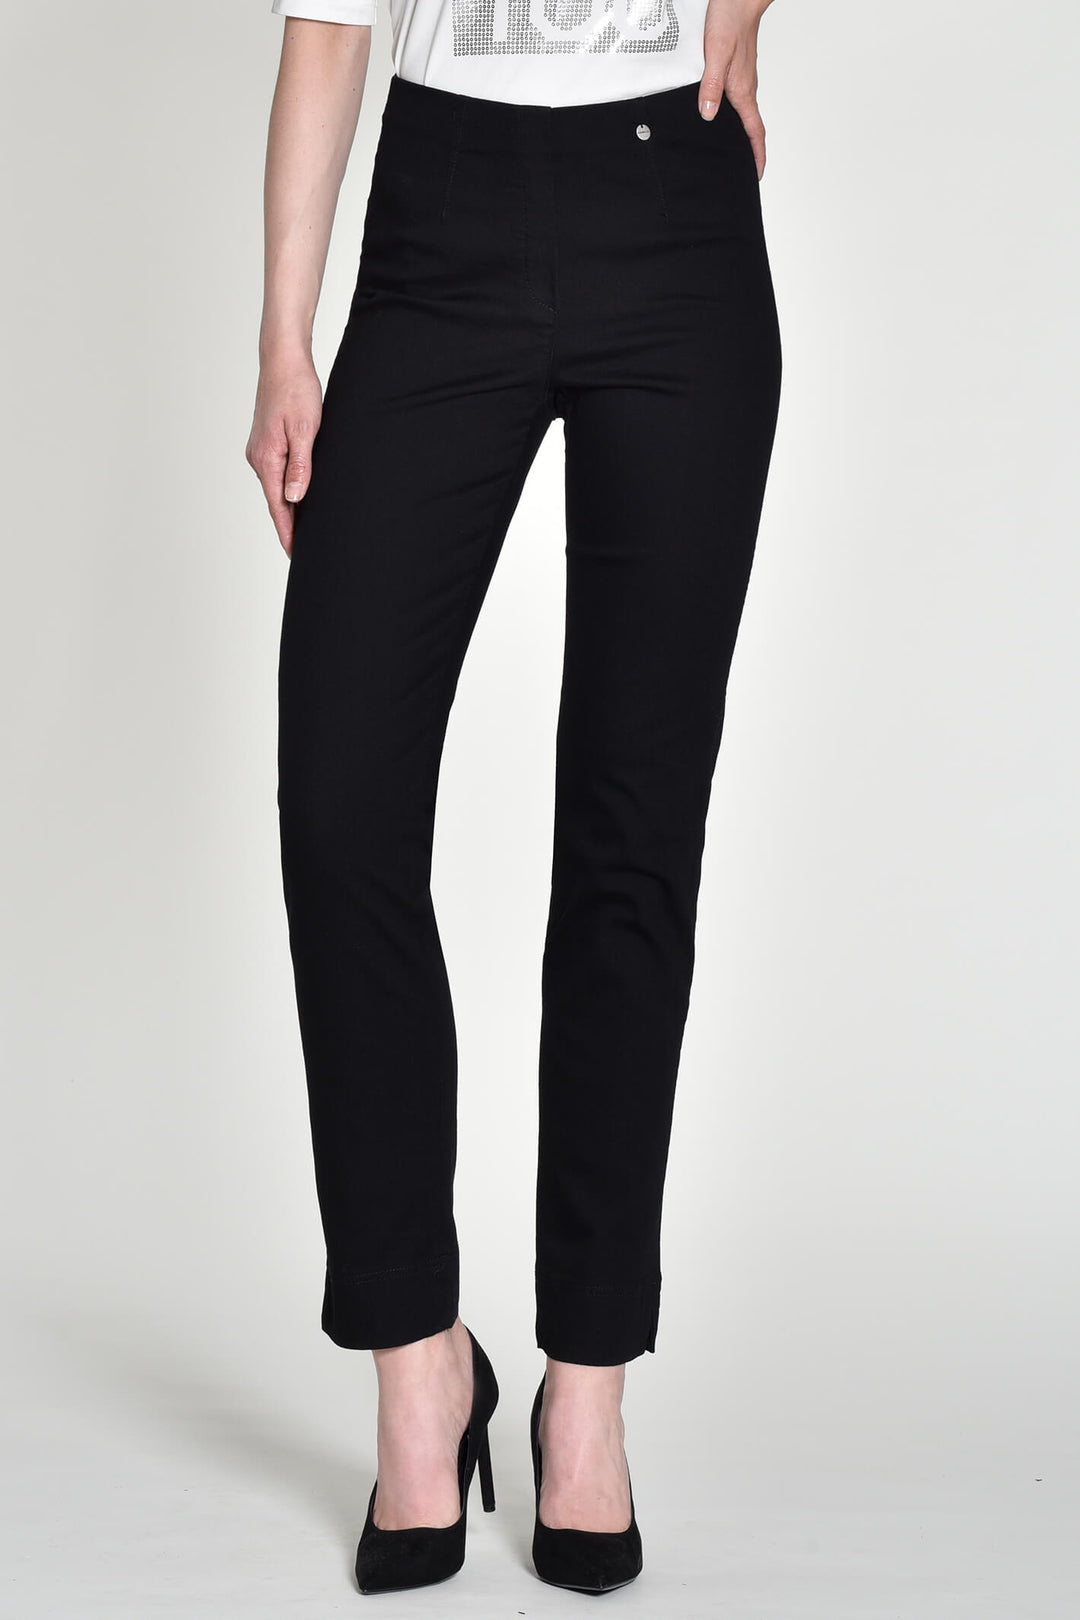 Robell Marie 51639-5448-90 78cm Black Pull-On Trousers - Shirley Allum Boutique